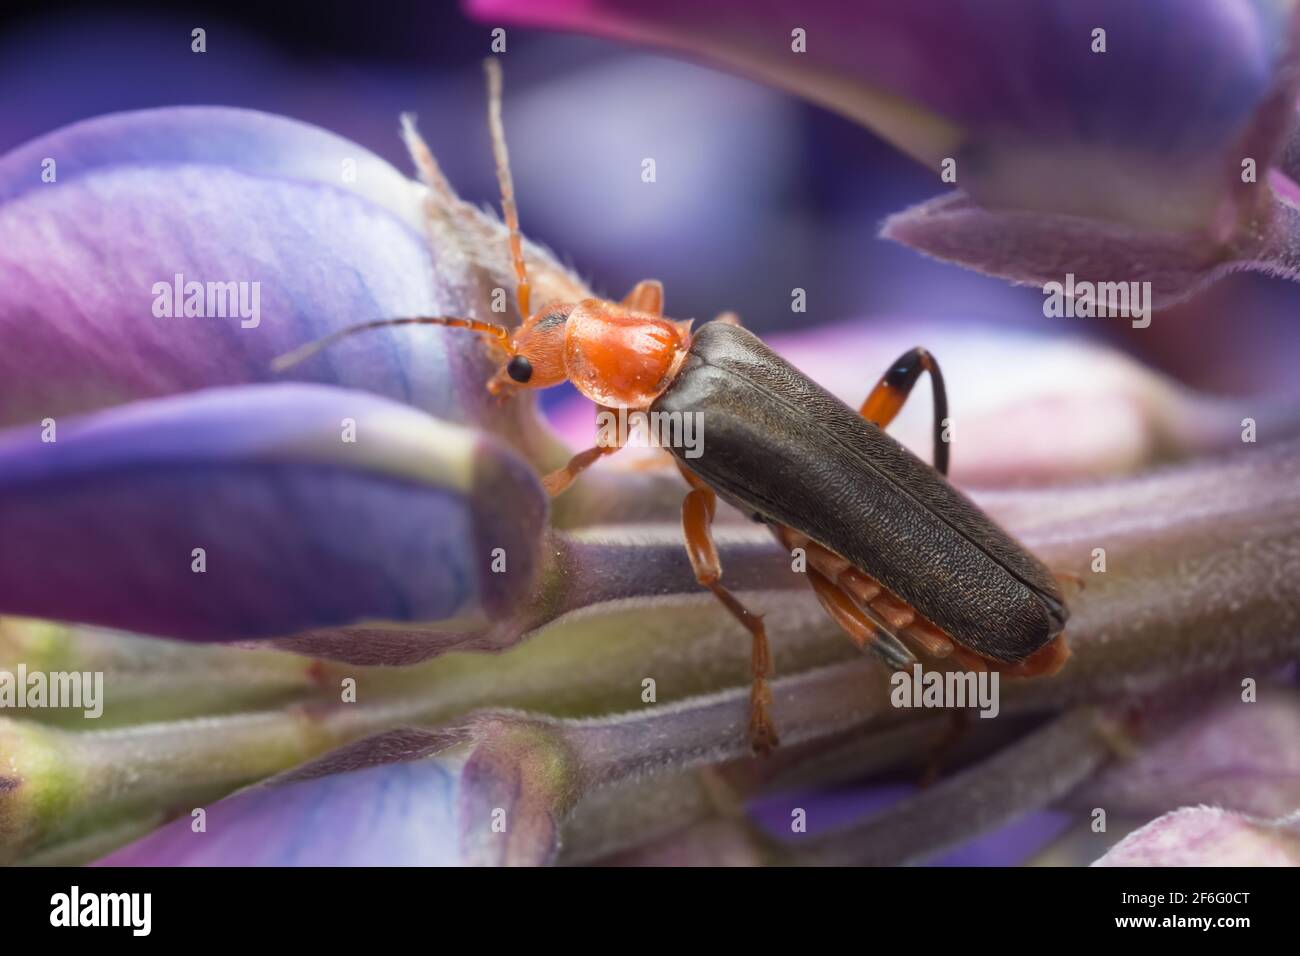 Soldier beetle Cantharis livida on lupin Stock Photo